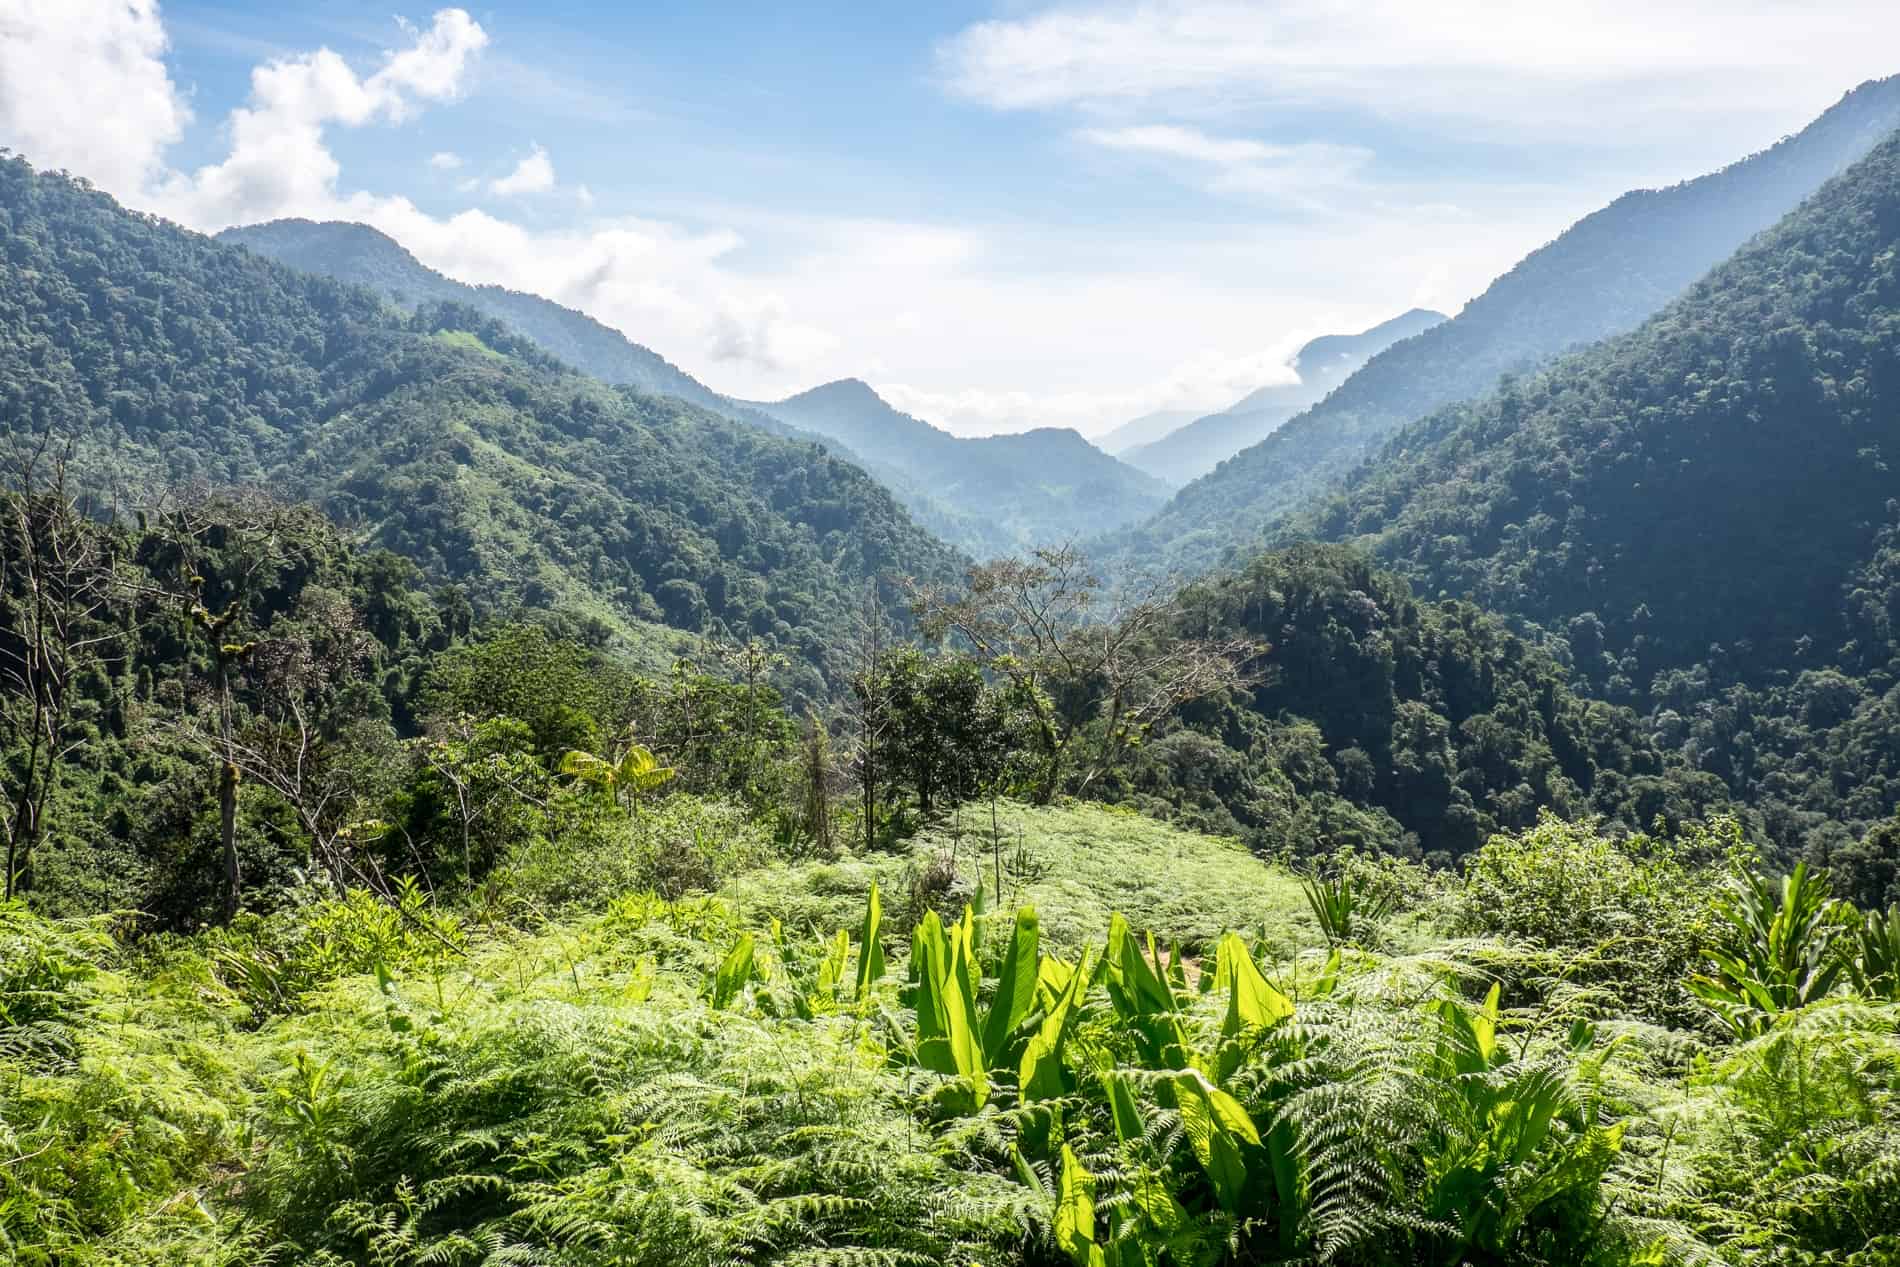 Lush tropical vegetation covers rolling hills in the Sierra Nevada mountains in Colombia. 